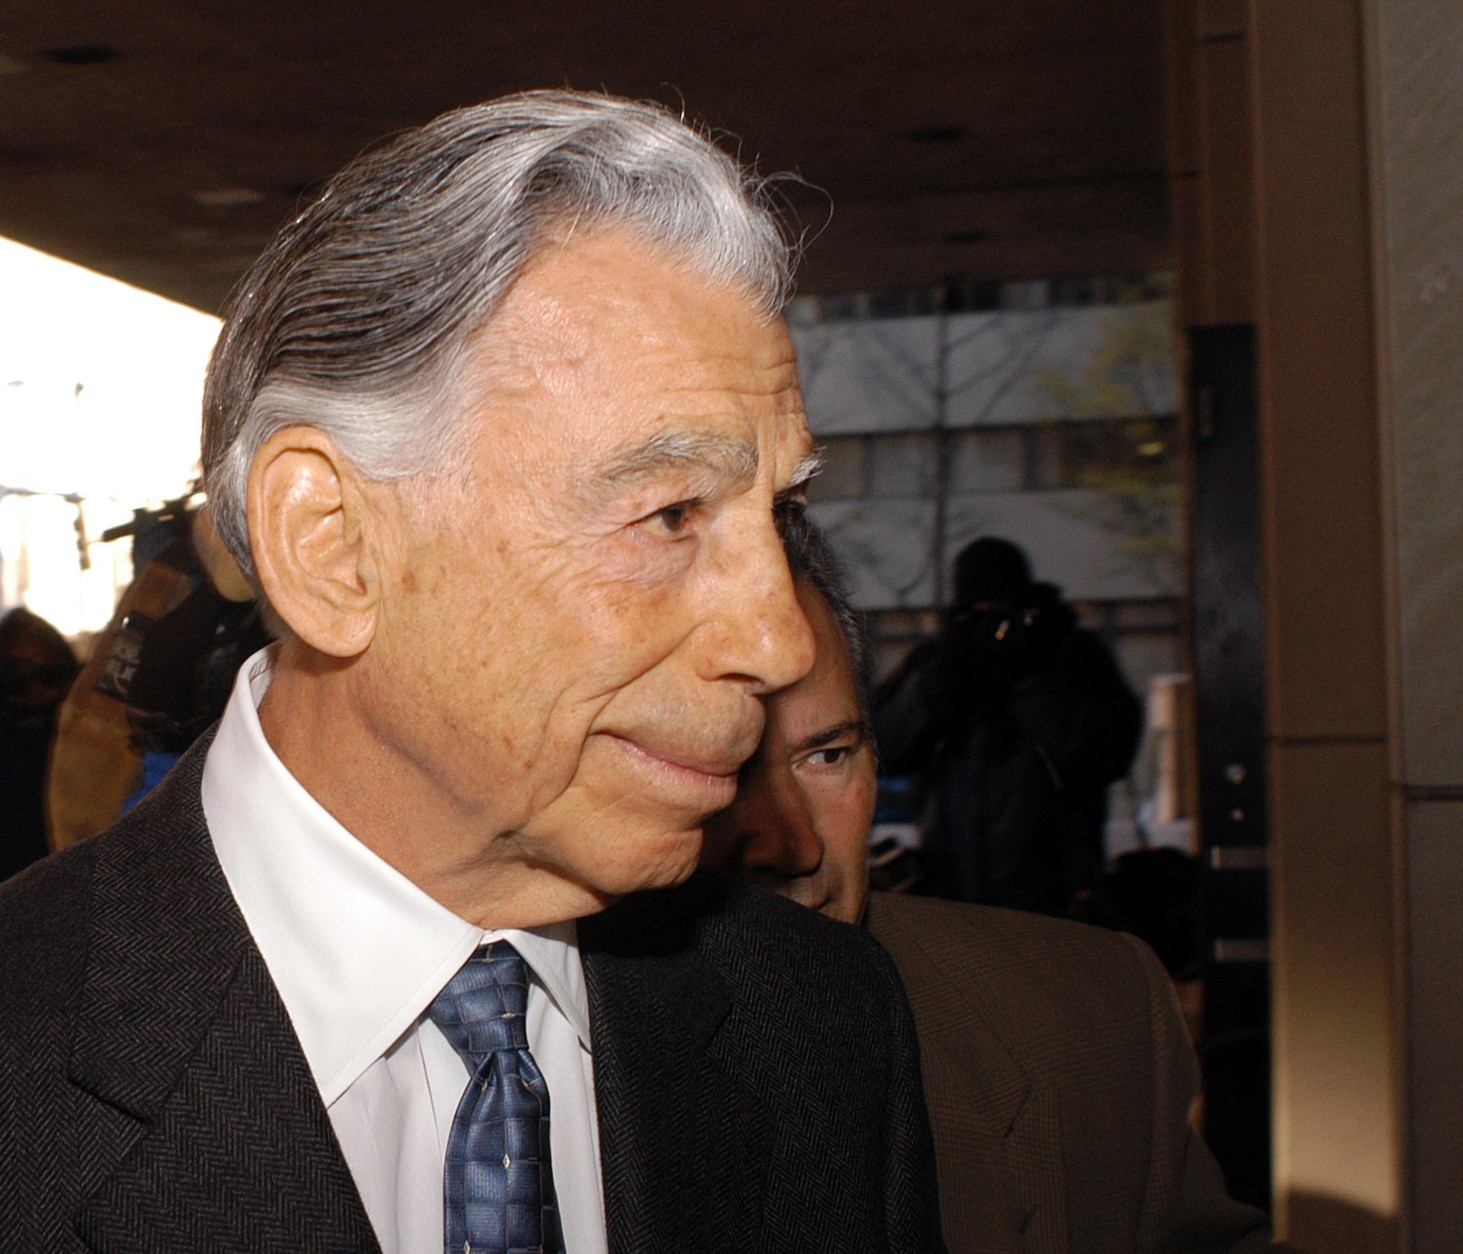 WILMINGTON, DE - DECEMBER 2:  Billionaire investor Kirk Kerkorian arrives at the J. Caleb Boggs Federal Building to testify in his lawsuit against Daimler Chrysler AG December 2, 2003 in Wilmington, Delaware. Kerkorian, whose Tracinda Corp. was Chrysler's largest shareholder until it merged with Daimler-Benz, alledges that Daimler-Benz officials commited fraud during merger talks in 1998.  (Photo by William Thomas Cain/Getty Images)